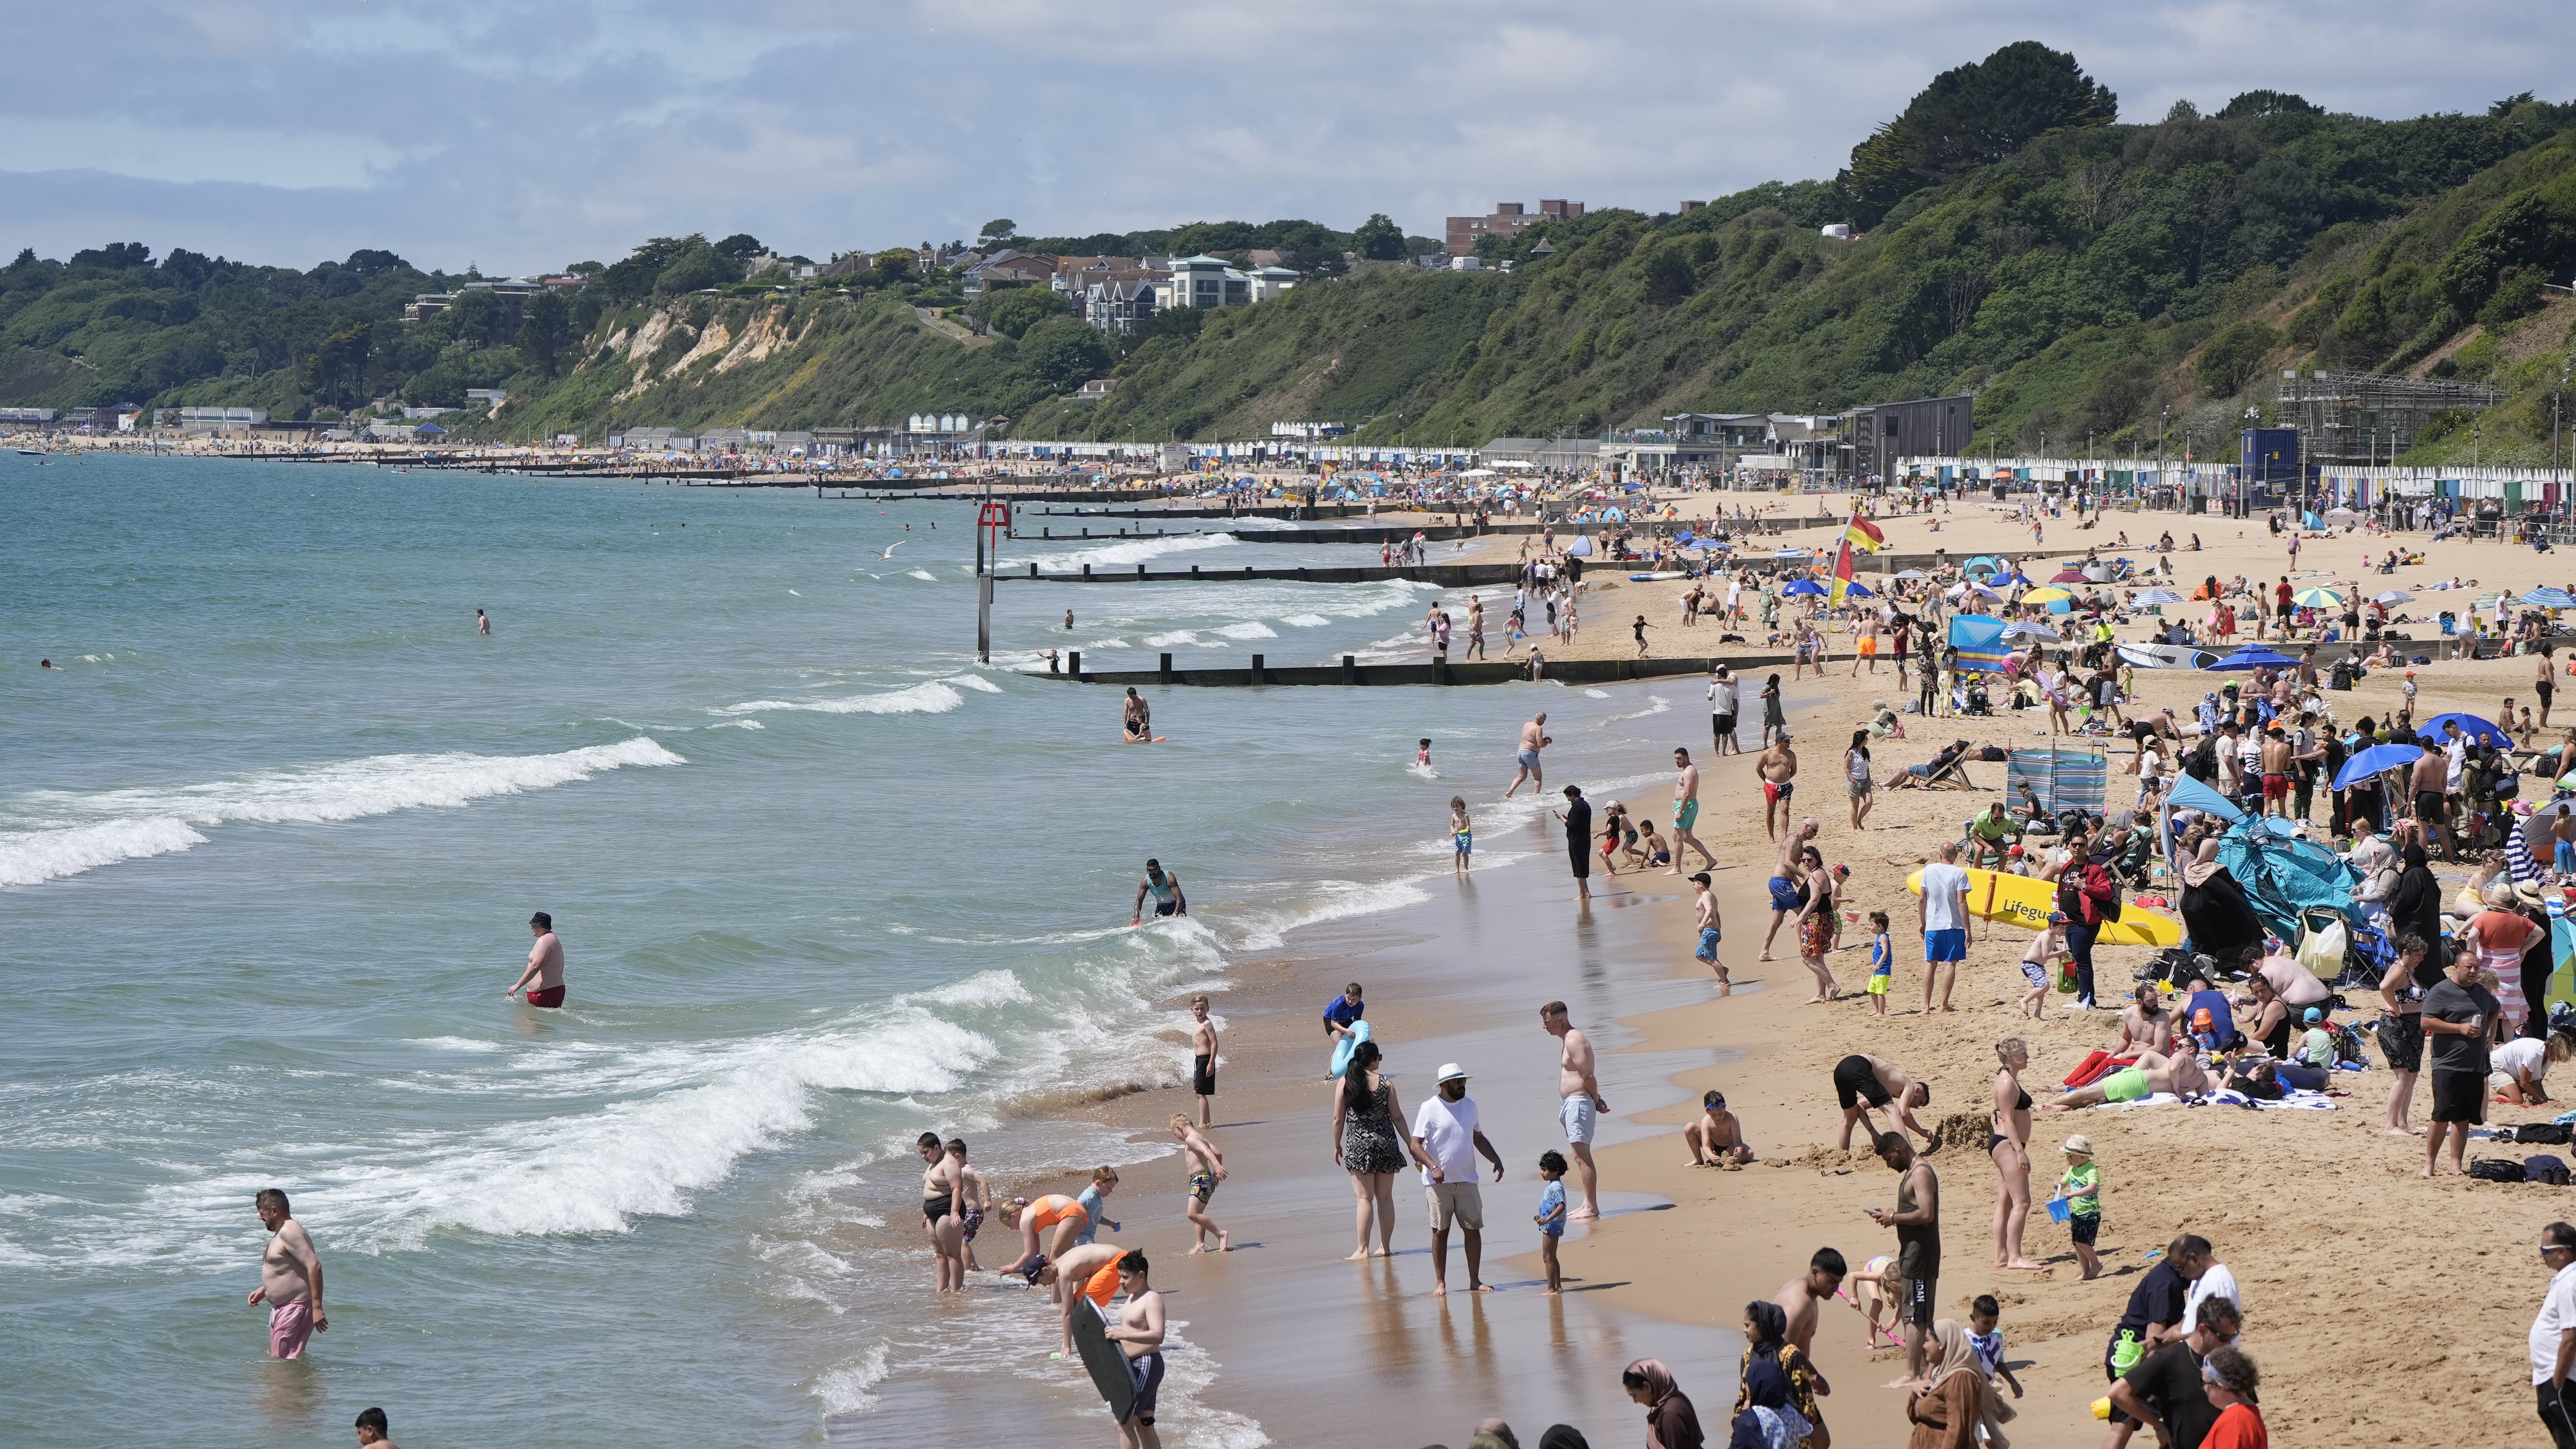 The man was reported in water at Bournemouth Beach, which has seen hot, sunny weather in recent days